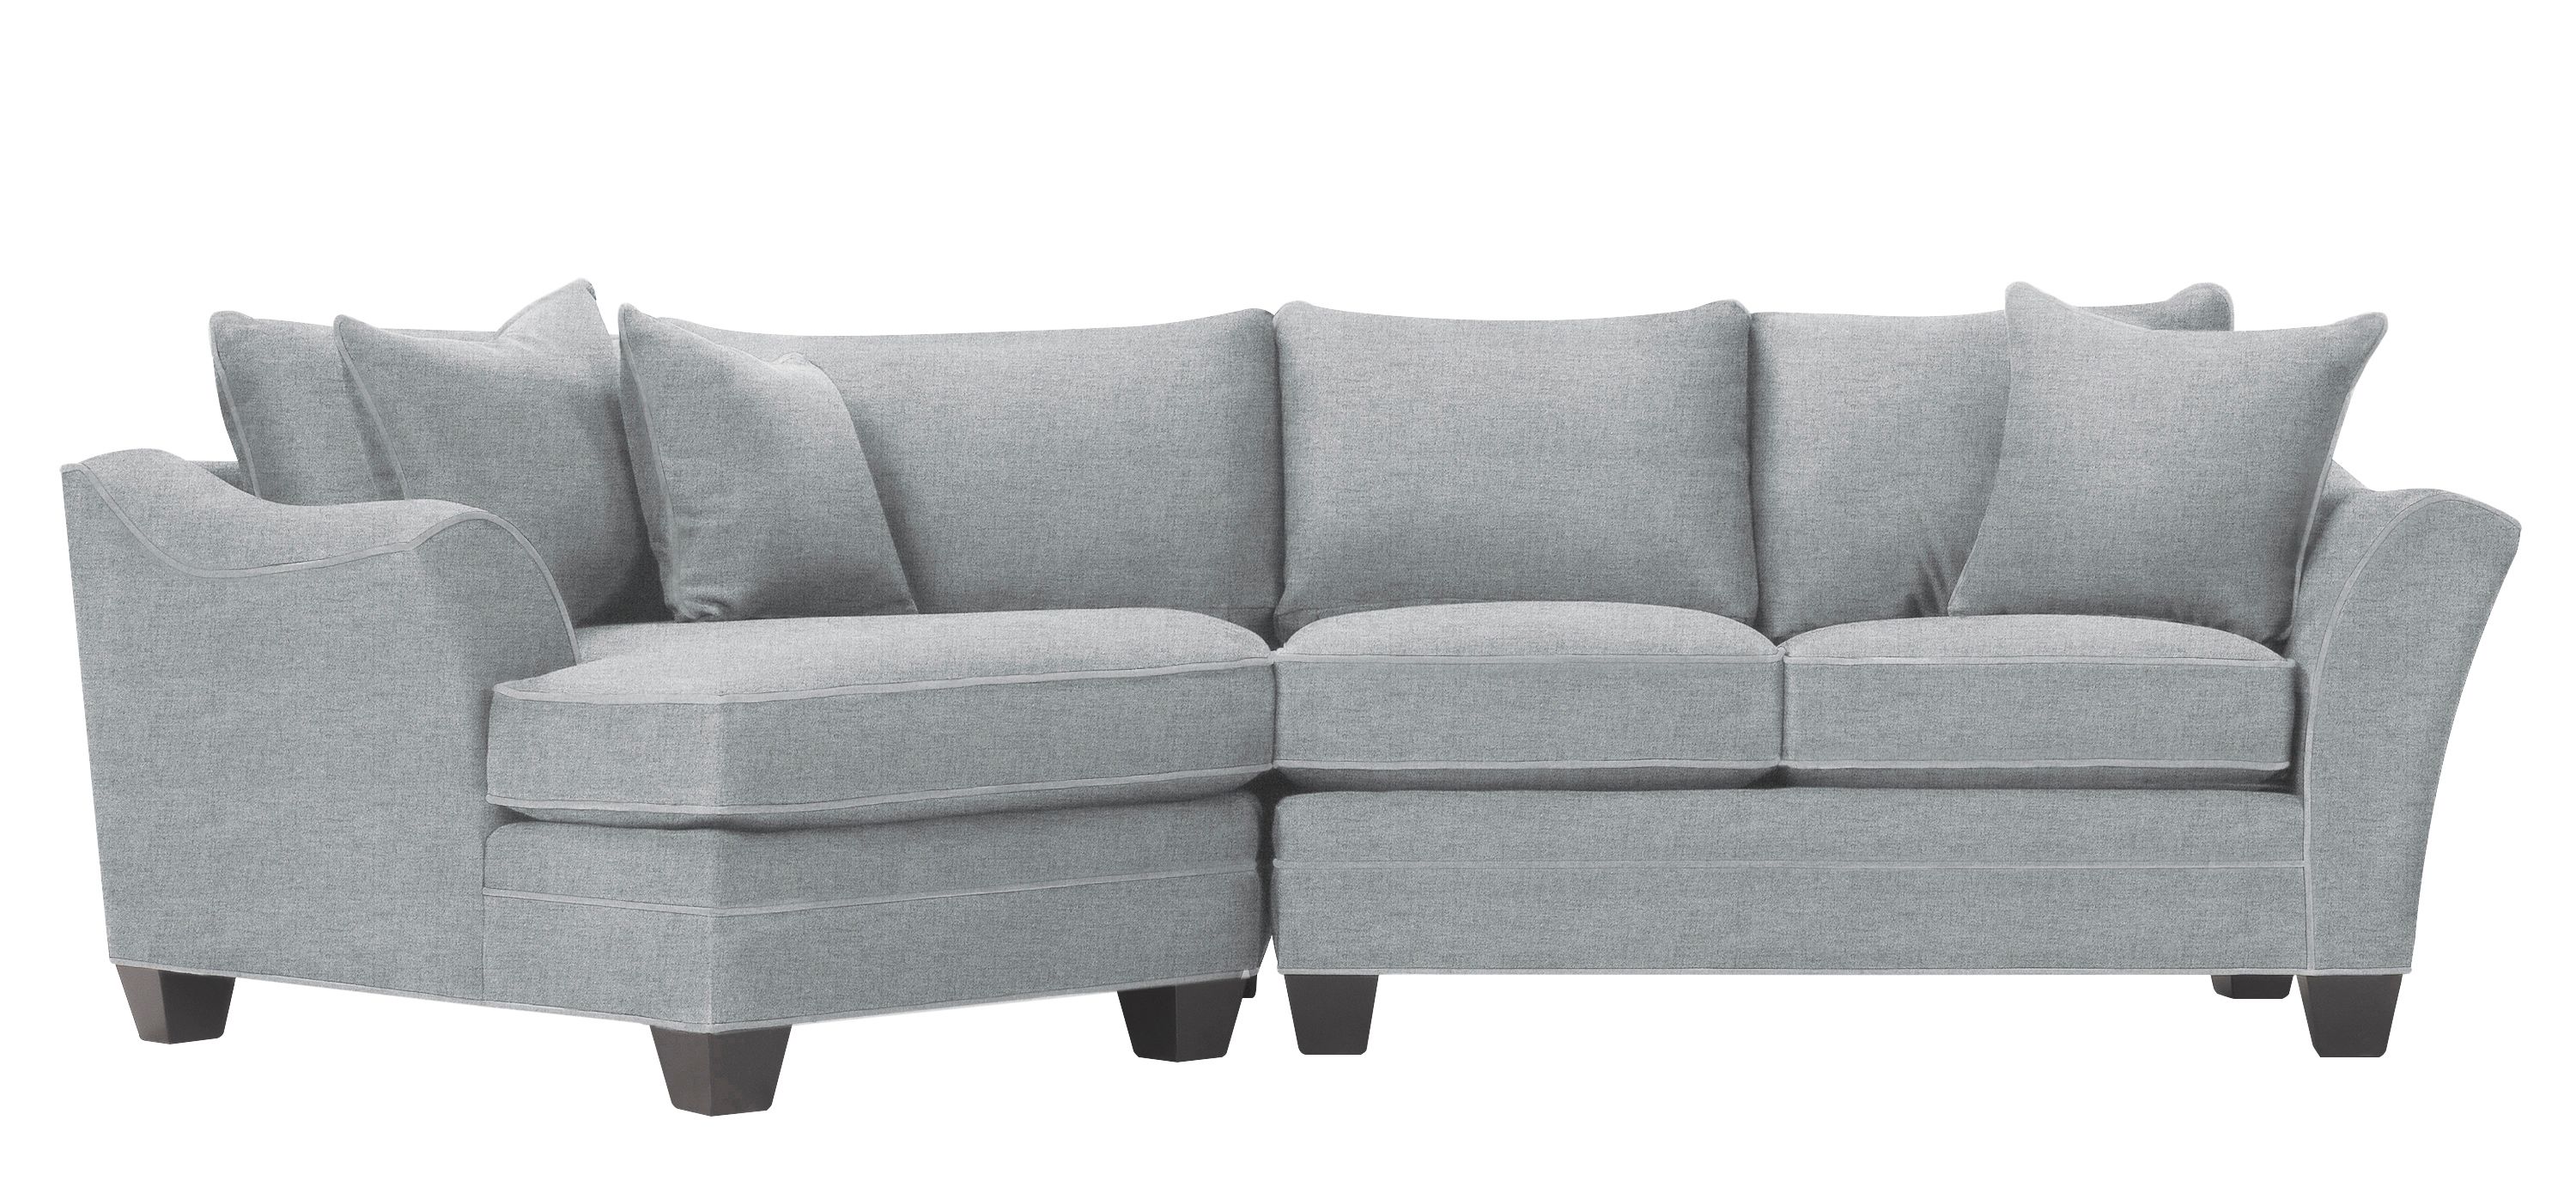 Foresthill 2-pc. Left Hand Facing Sectional Sofa